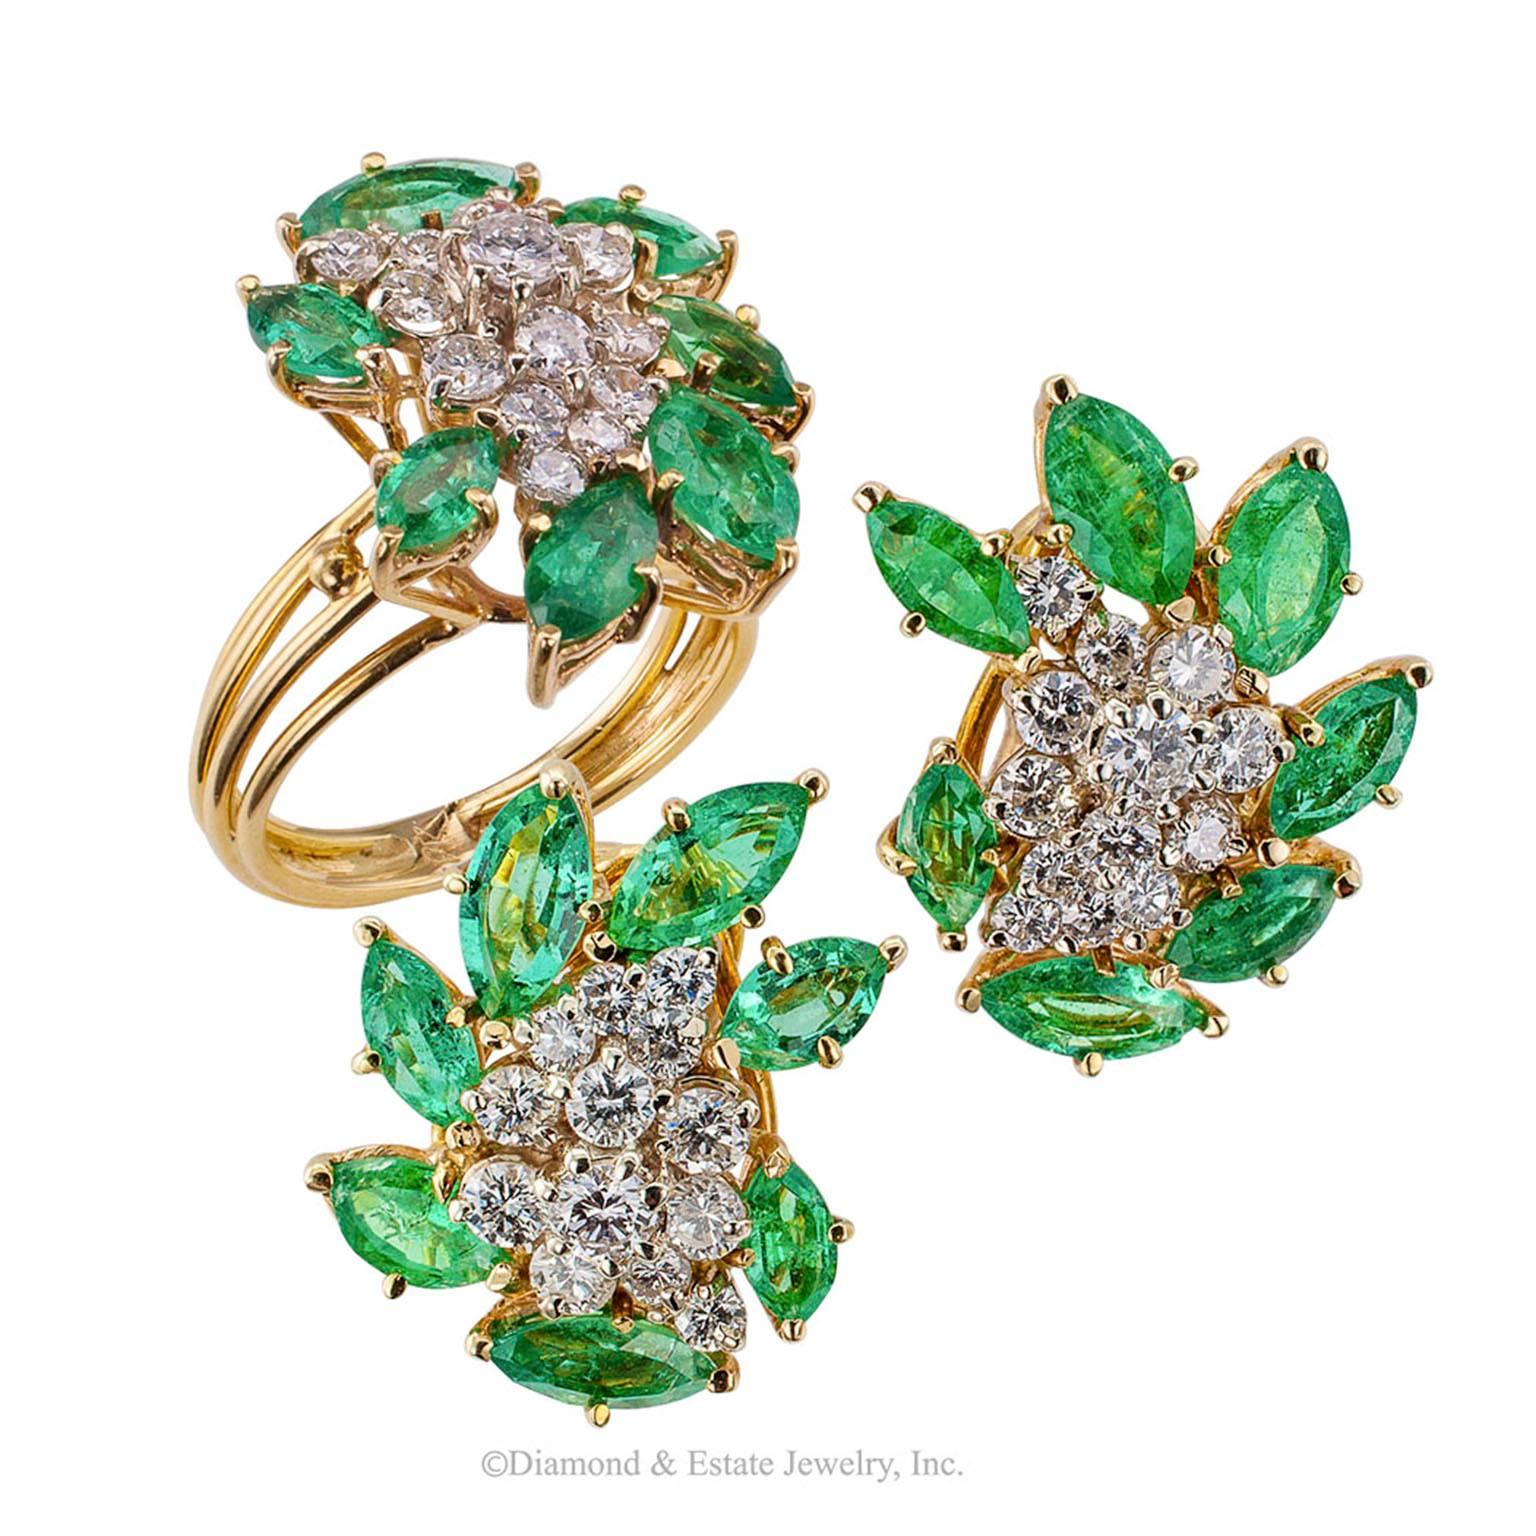 1970s Emerald Diamond Gold Cocktail Ring

1970s emerald and diamond cocktail gold ring.  Designed as a cascading cluster of round brilliant-cut diamonds weighing approximately 0.75 carat, approximately H color and SI clarity, within a radiating